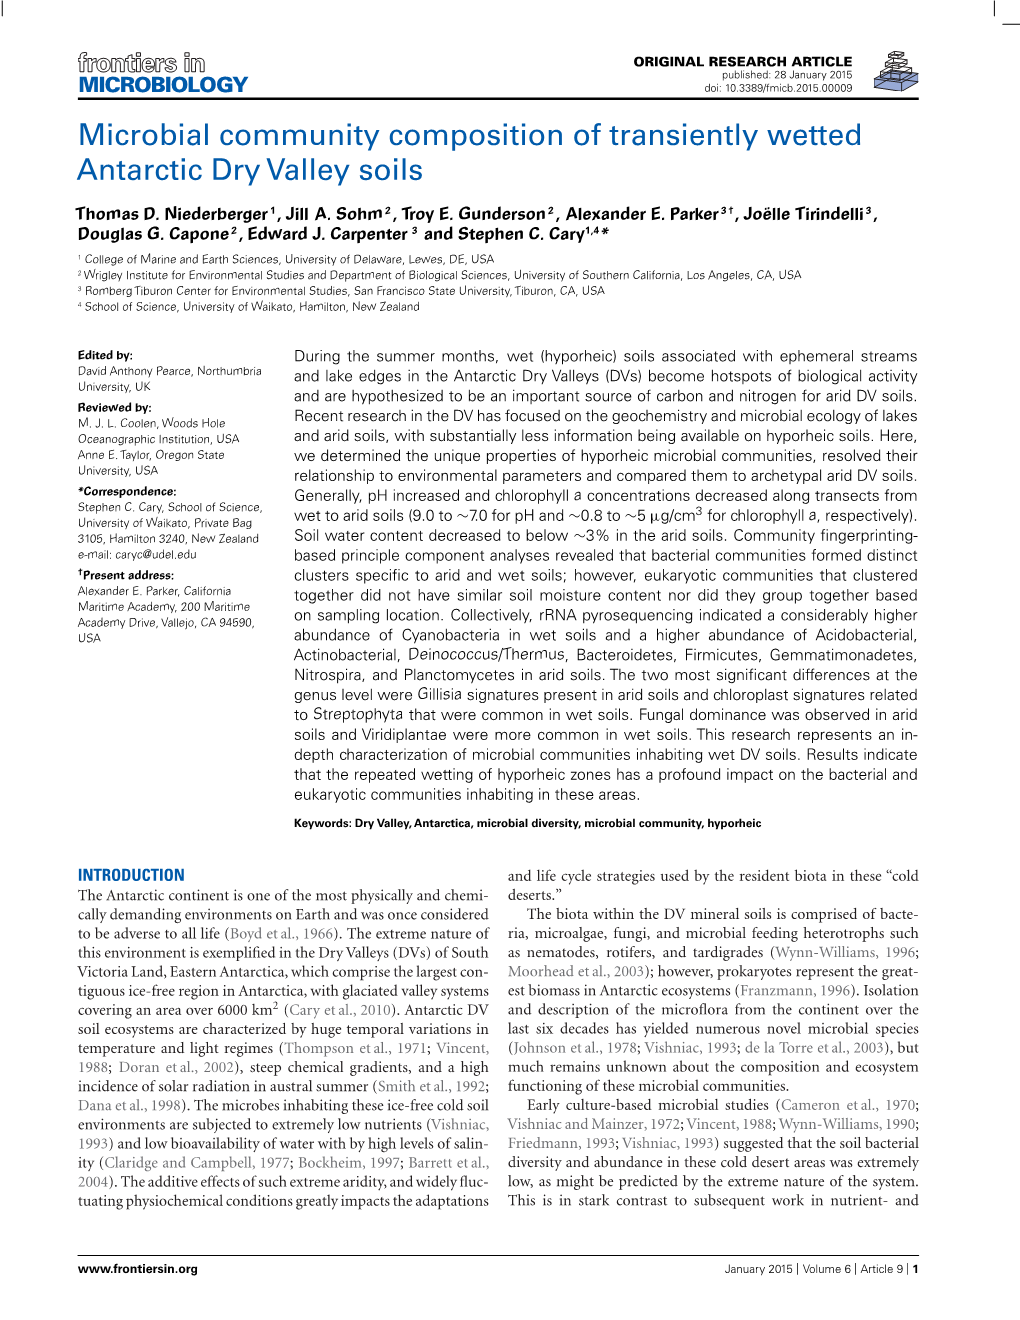 Microbial Community Composition of Transiently Wetted Antarctic Dry Valley Soils